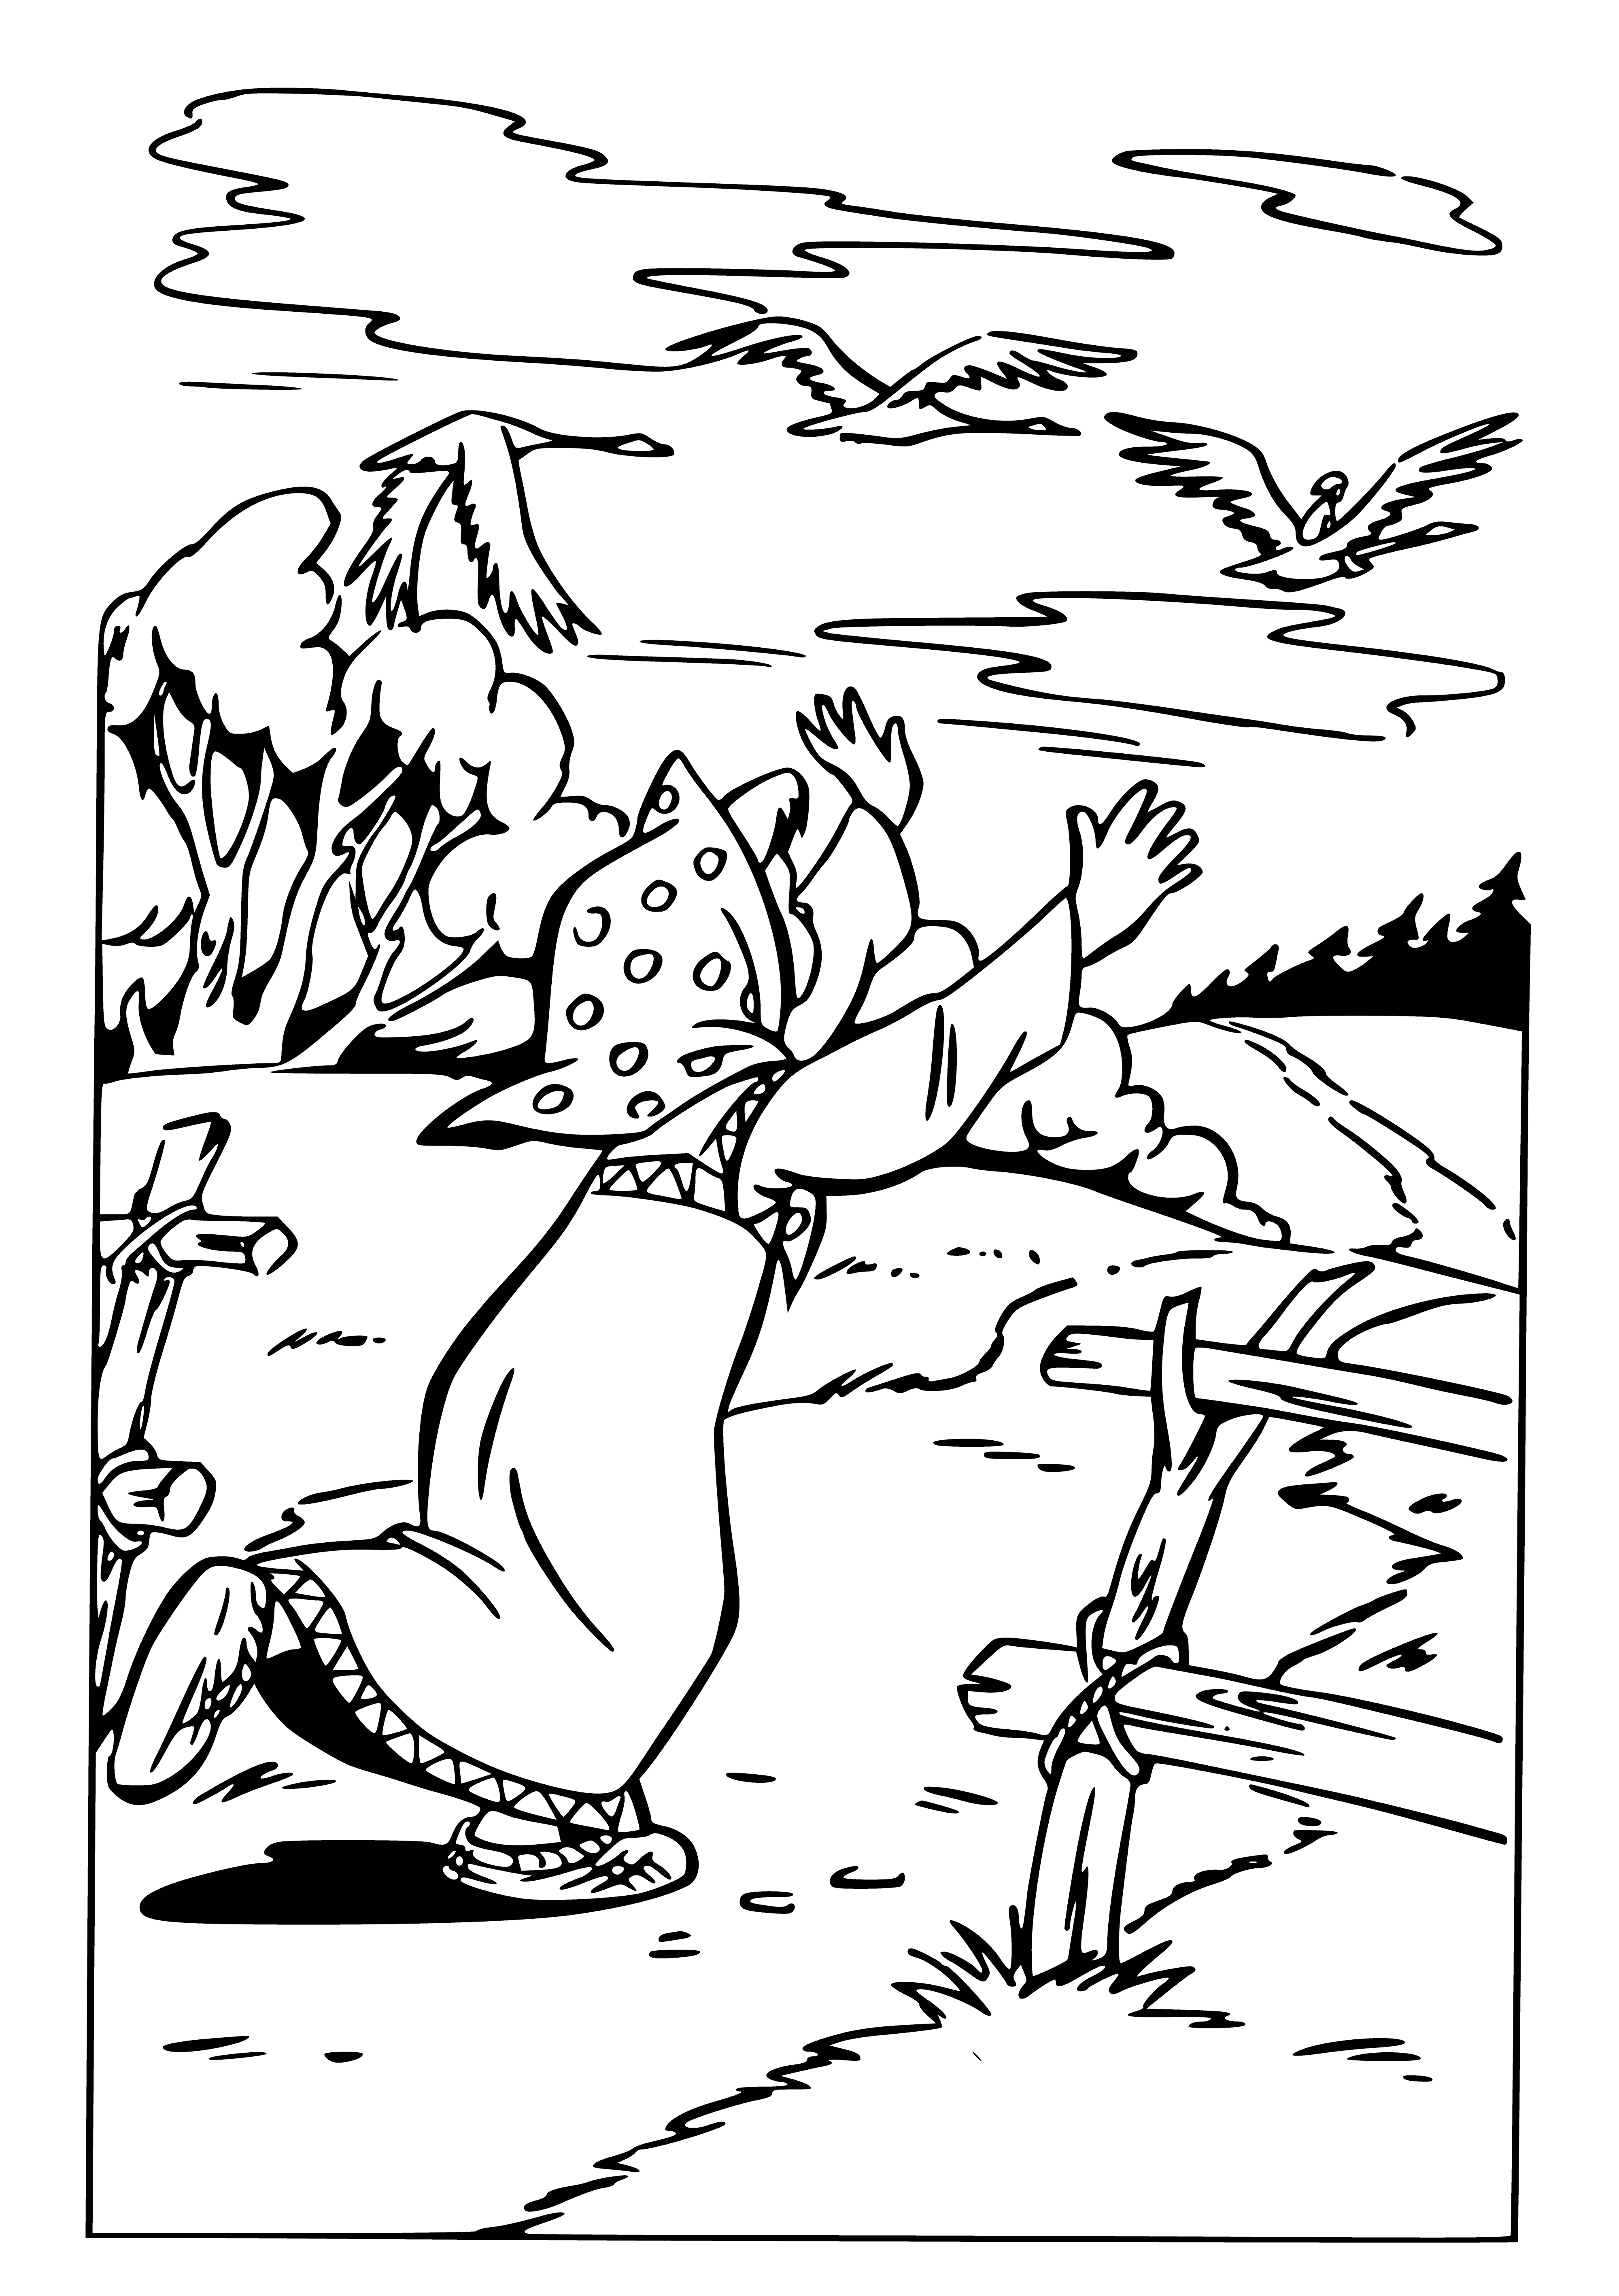 Geese-swans carry away Ivanushka coloring page